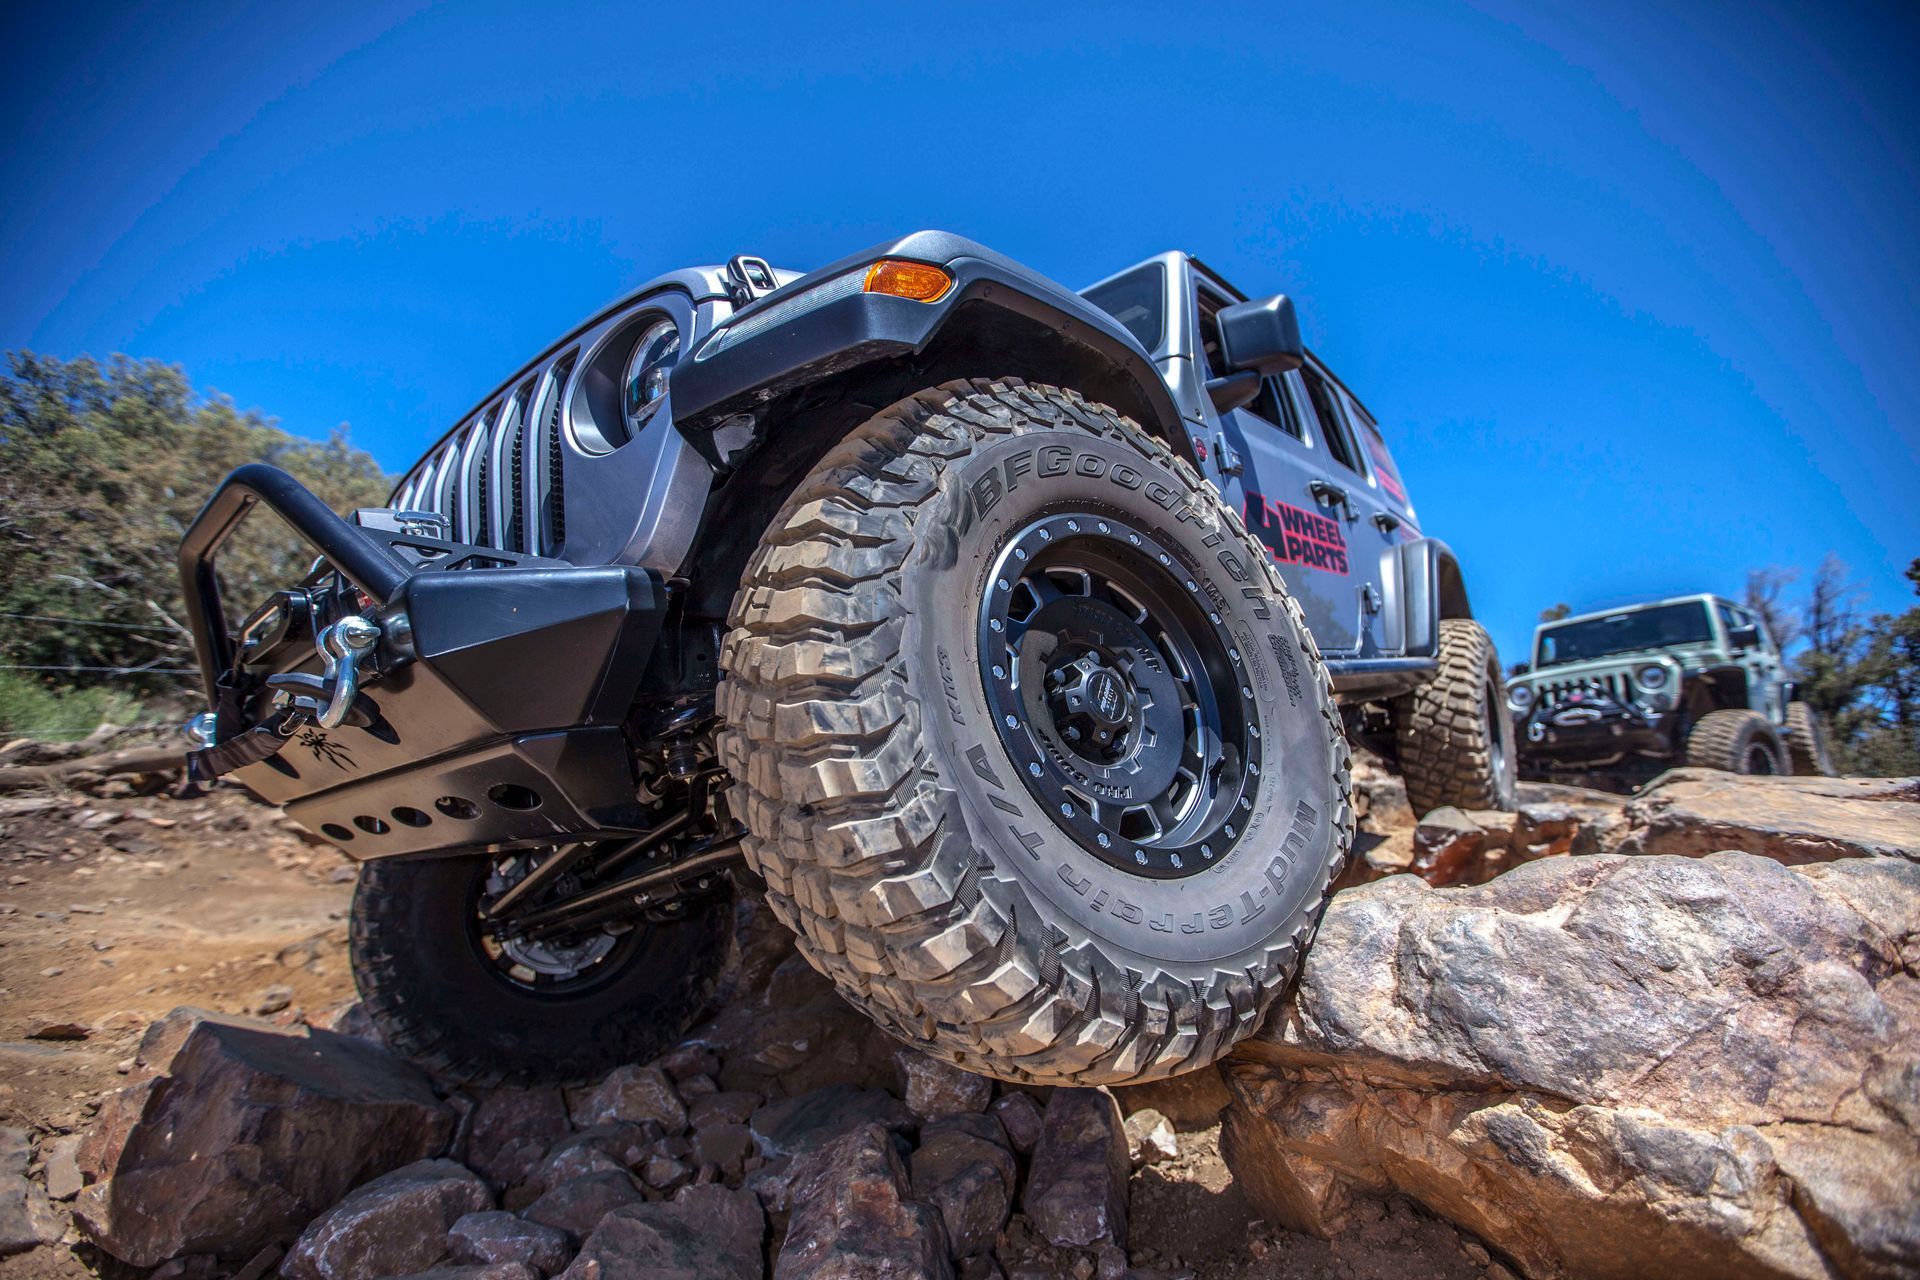 Exploring the Performance and Durability of the BFGoodrich Mud-Terrain T/A KM3